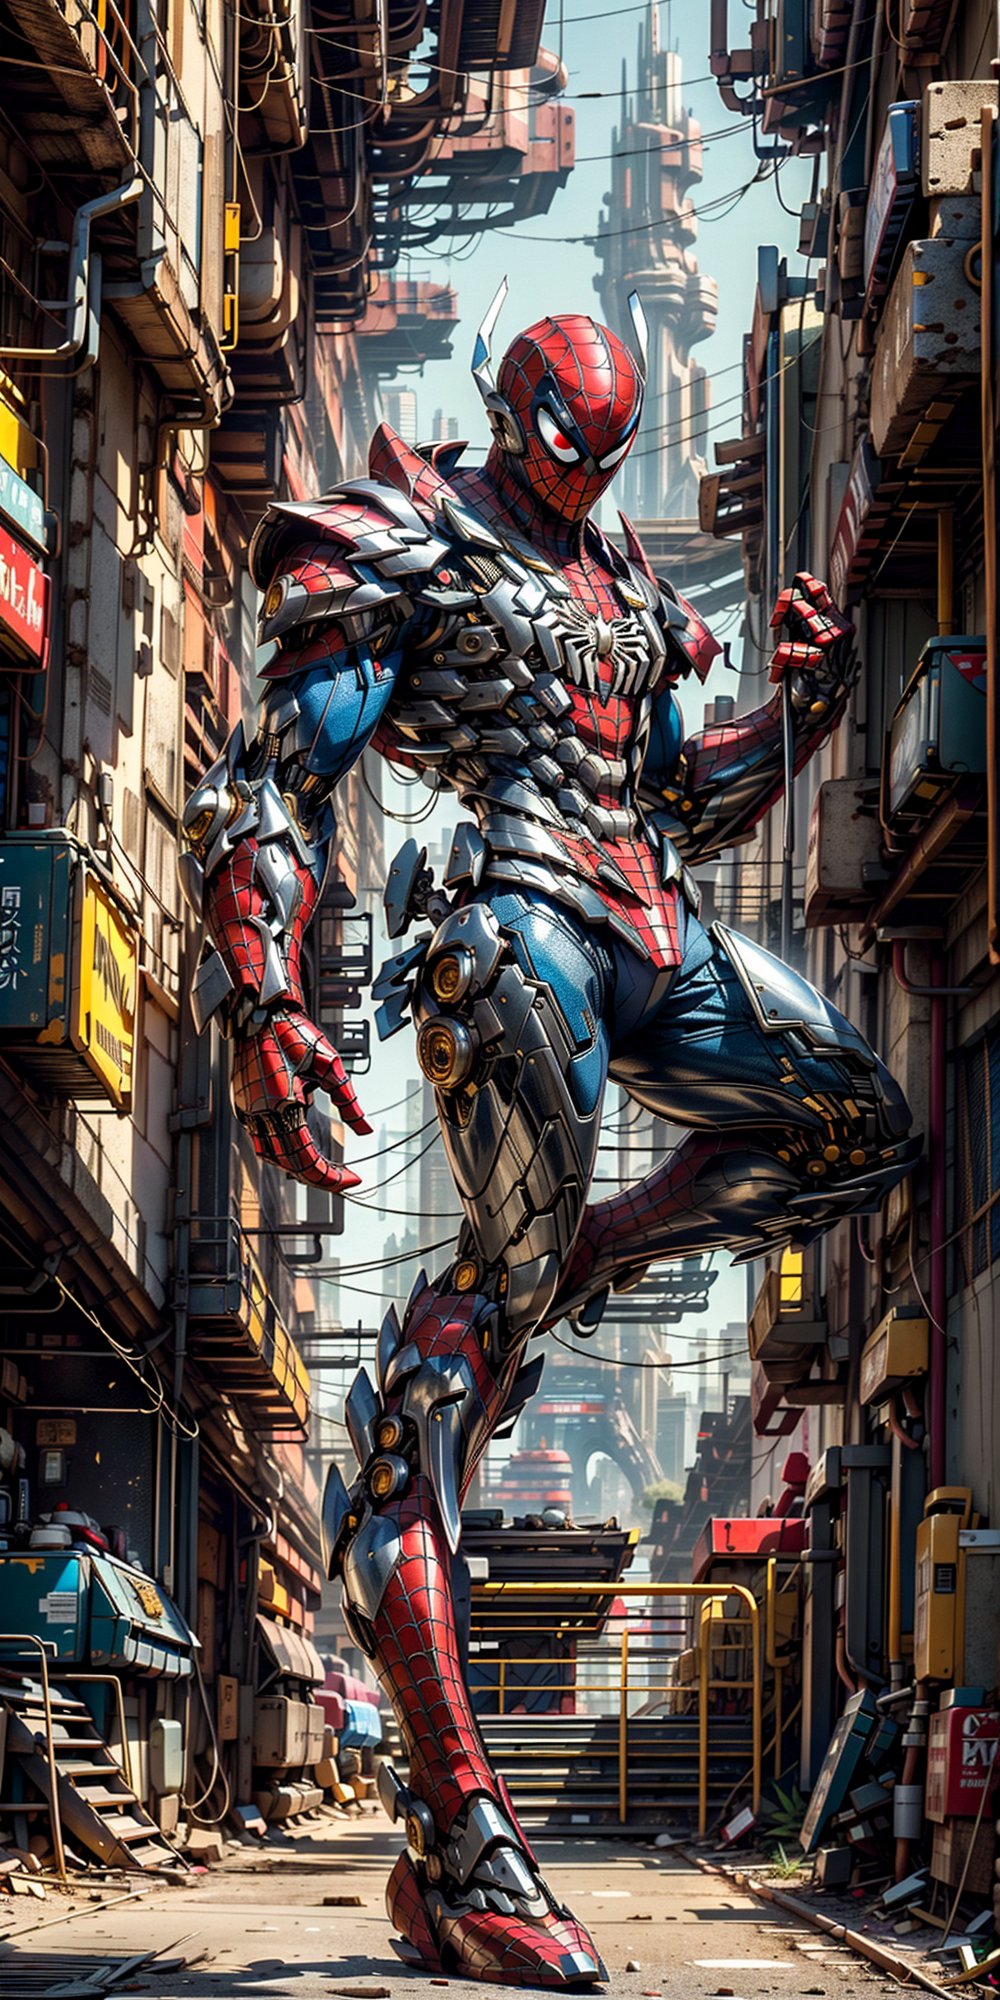 In the neon-lit streets of a cyberpunk metropolis, a Hi-Tech swordsman emerges as a beacon of futuristic prowess. Encased in a robotic suit of red and blue armor, he stands within a pulsating cocoon of yellow luminescence. The armor's intricate details reflect the advanced technology that defines this world.

At his side, a custom cyber-style sword gleams with an otherworldly radiance, its blade a fusion of artistry and advanced engineering. The streets behind him are awash in the vibrant glow of neon signs and holographic advertisements, painting a vivid backdrop to his enigmatic presence.

The image captures every gleam and glint in astonishing 4K Ultra HDR quality, enhancing the fine details of the cybernetic armor and the interplay of light and shadow in the urban setting. This scene encapsulates the essence of cyberpunk's high-tech aesthetics, delivering an image that seamlessly marries advanced technology with cutting-edge style.,mecha musume,robot, (blurry background), (high detailed image HDR quality), (32k HDR resolution quality), realistic mecha suit armour, (((spider-man style mecha armour)))